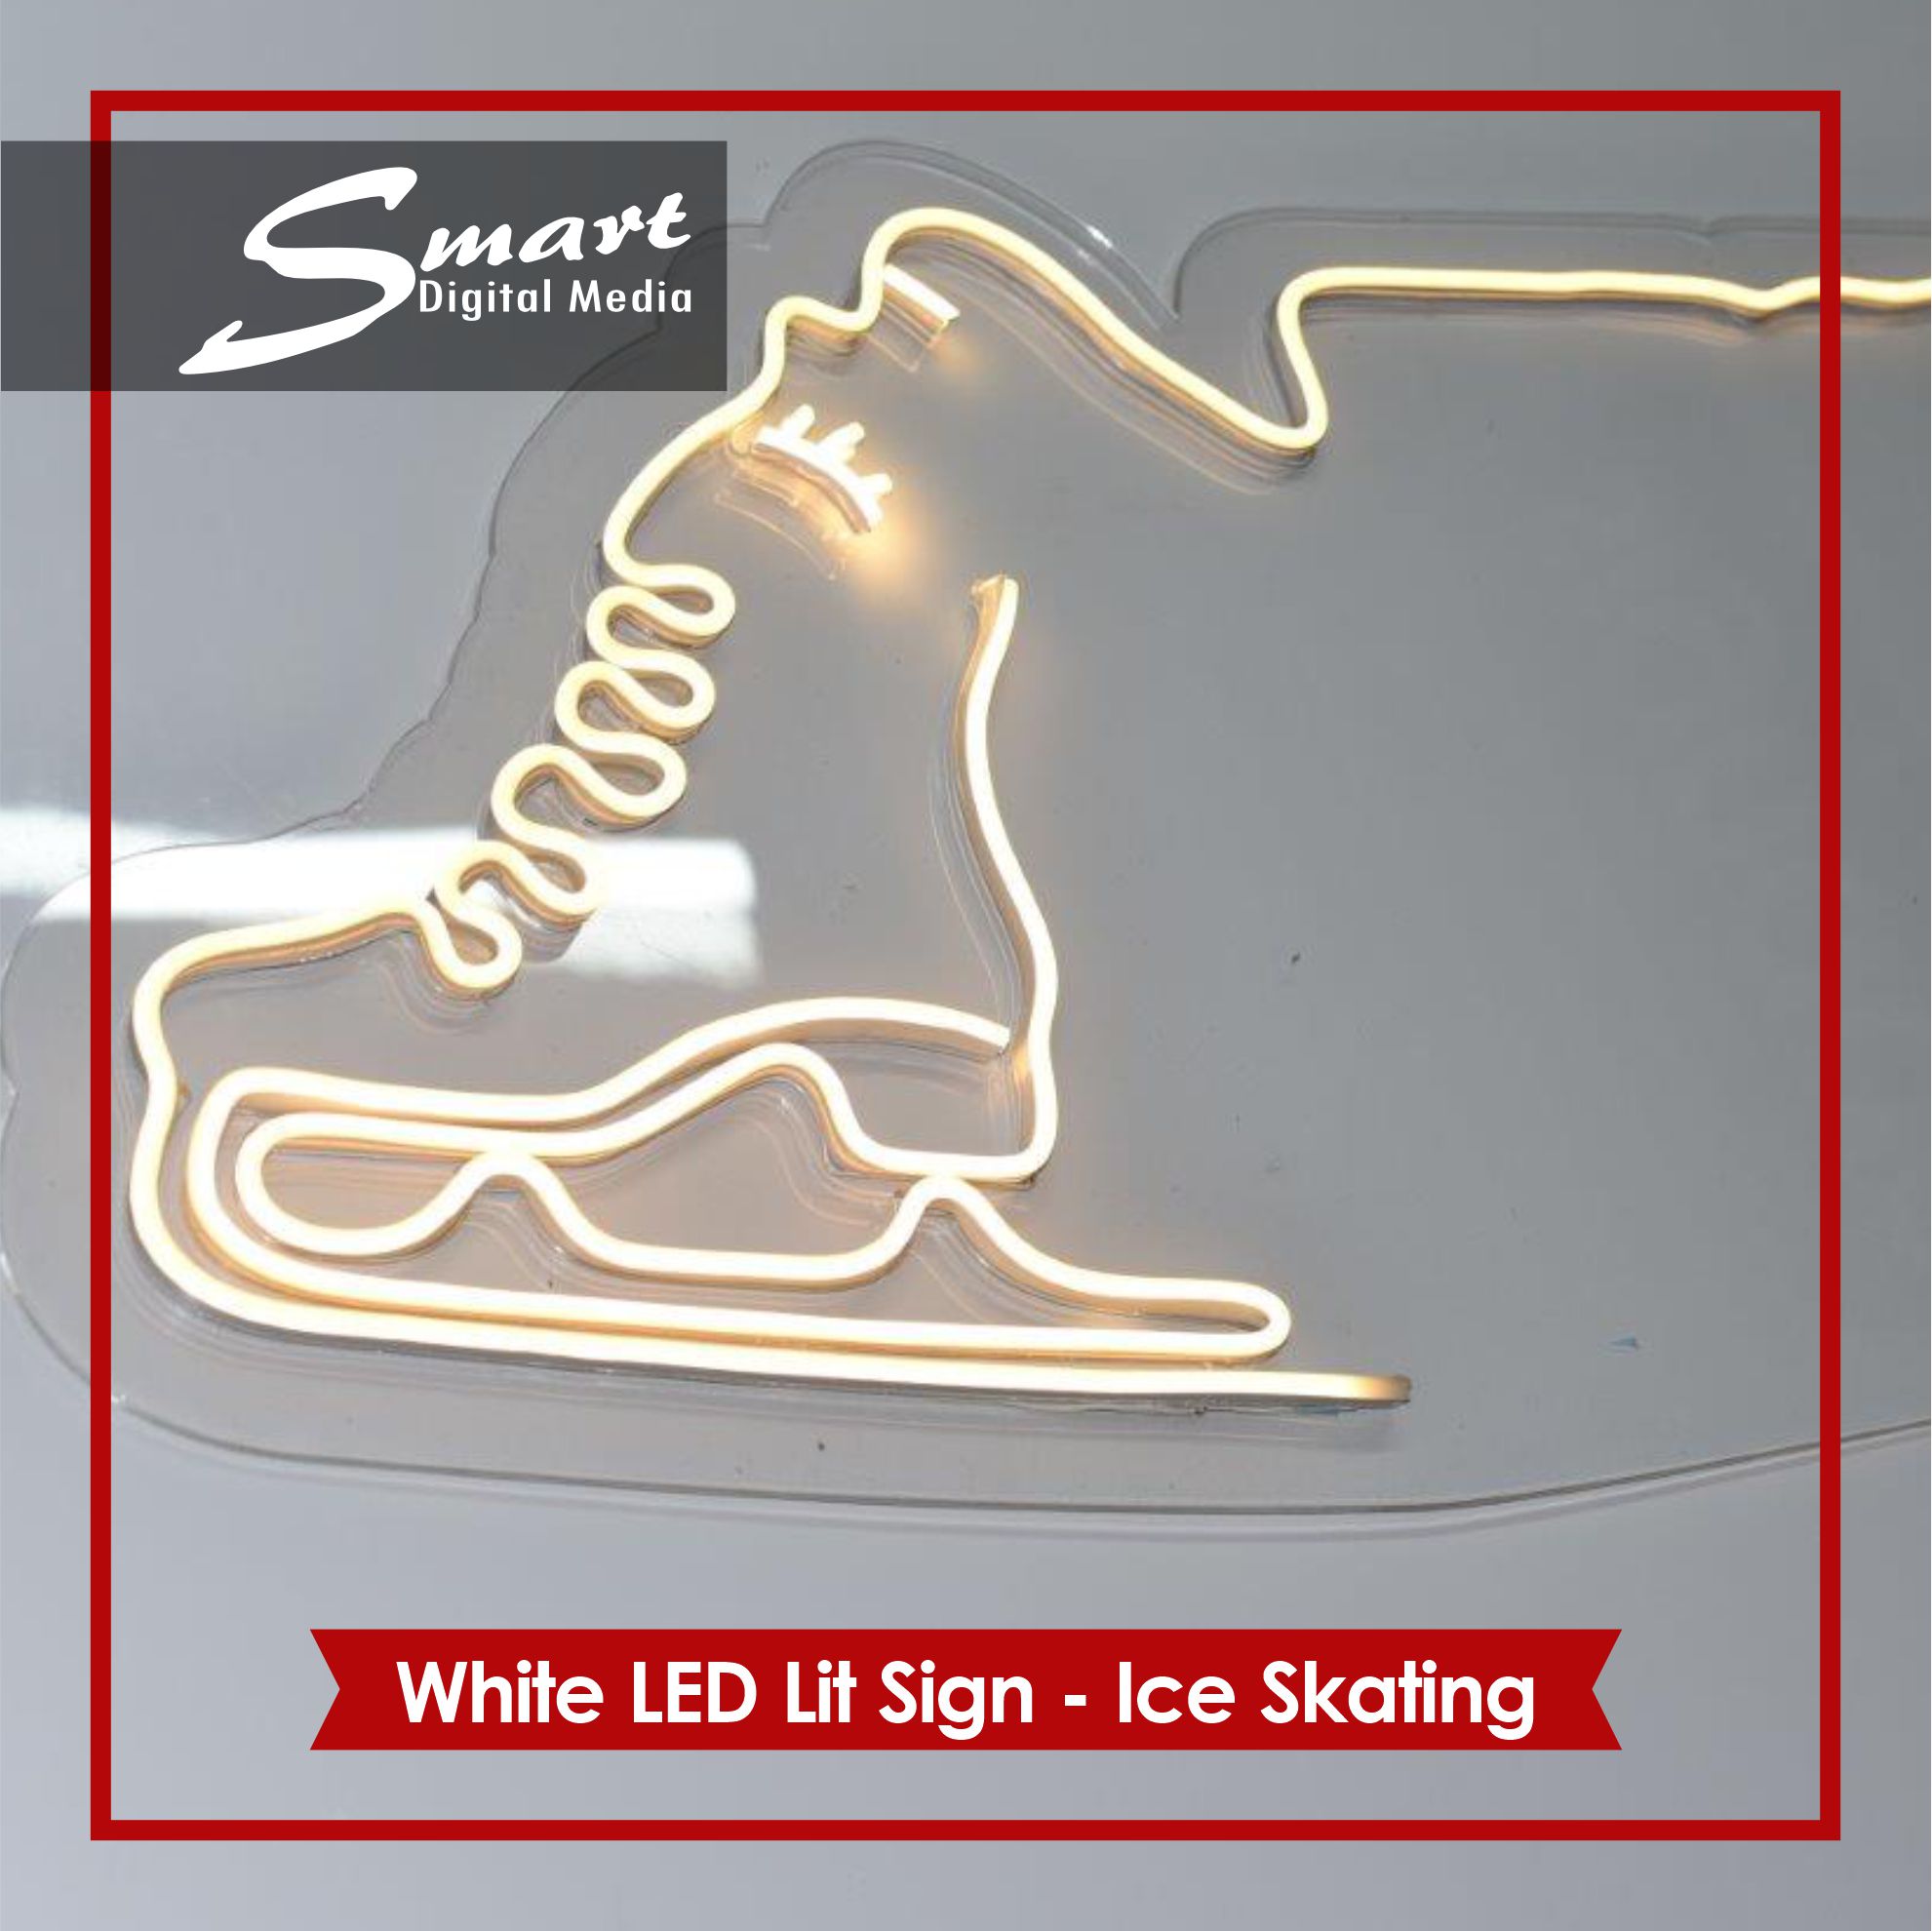 Custom made LED NEON wedding Light Monograms available at Smart Digital Media Paarl. From concept to final product, we offer all services in-house. #neonsign #ledsigns #wedding #iceskating #weddingideas